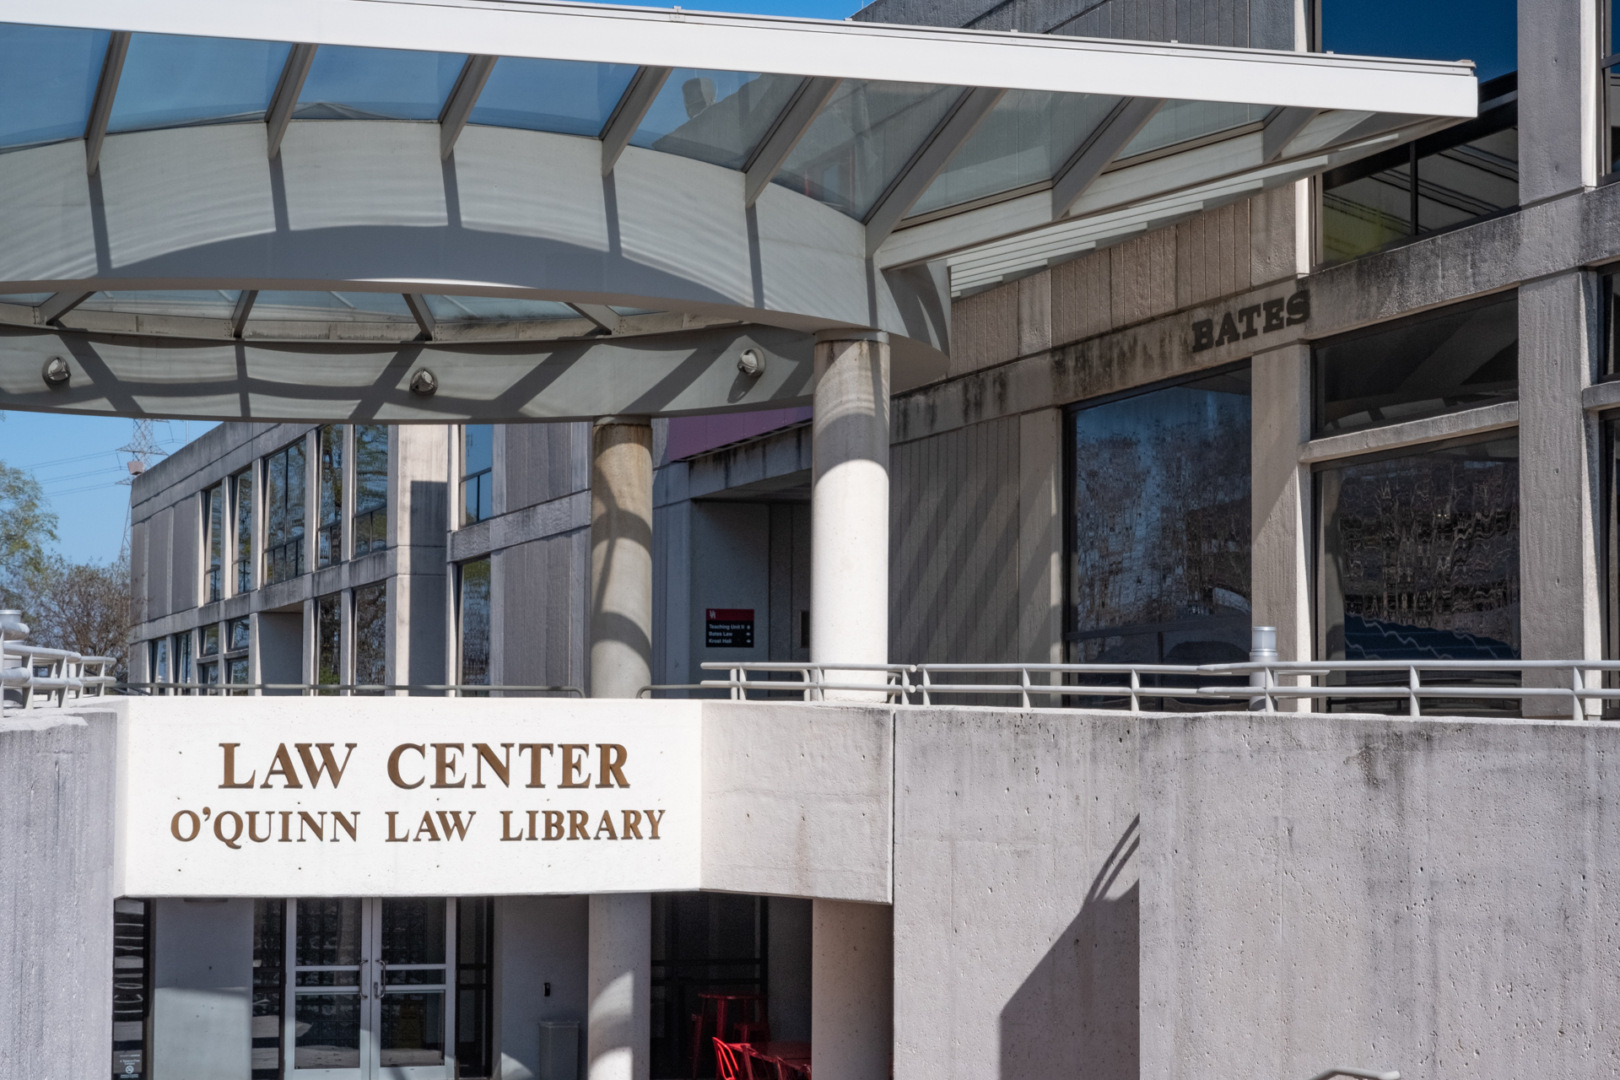 The Law Center is revamping its website for virtual tours and allowing for online classes to be audited by applicants to make up for admission services lost because of the coronavirus outbreak. | FIle photo